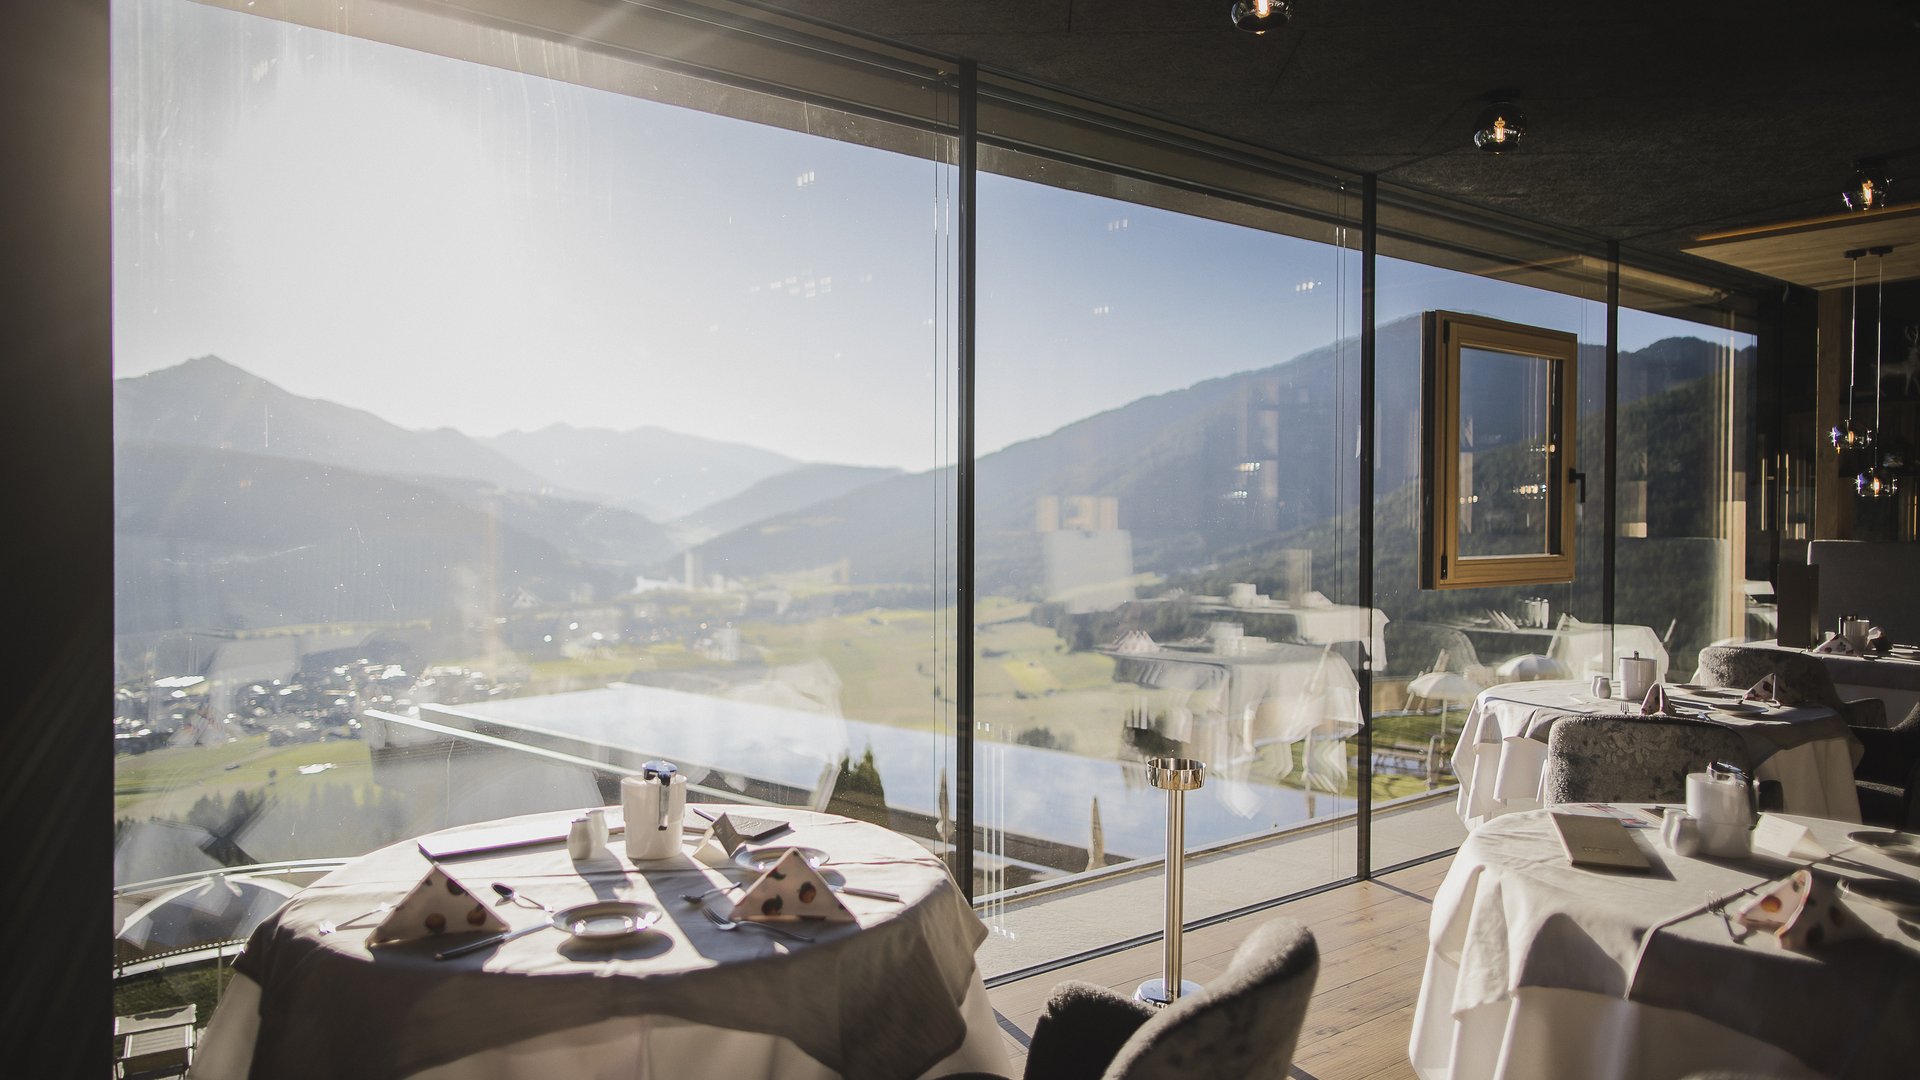 The gourmet hotel in South Tyrol for connoisseurs